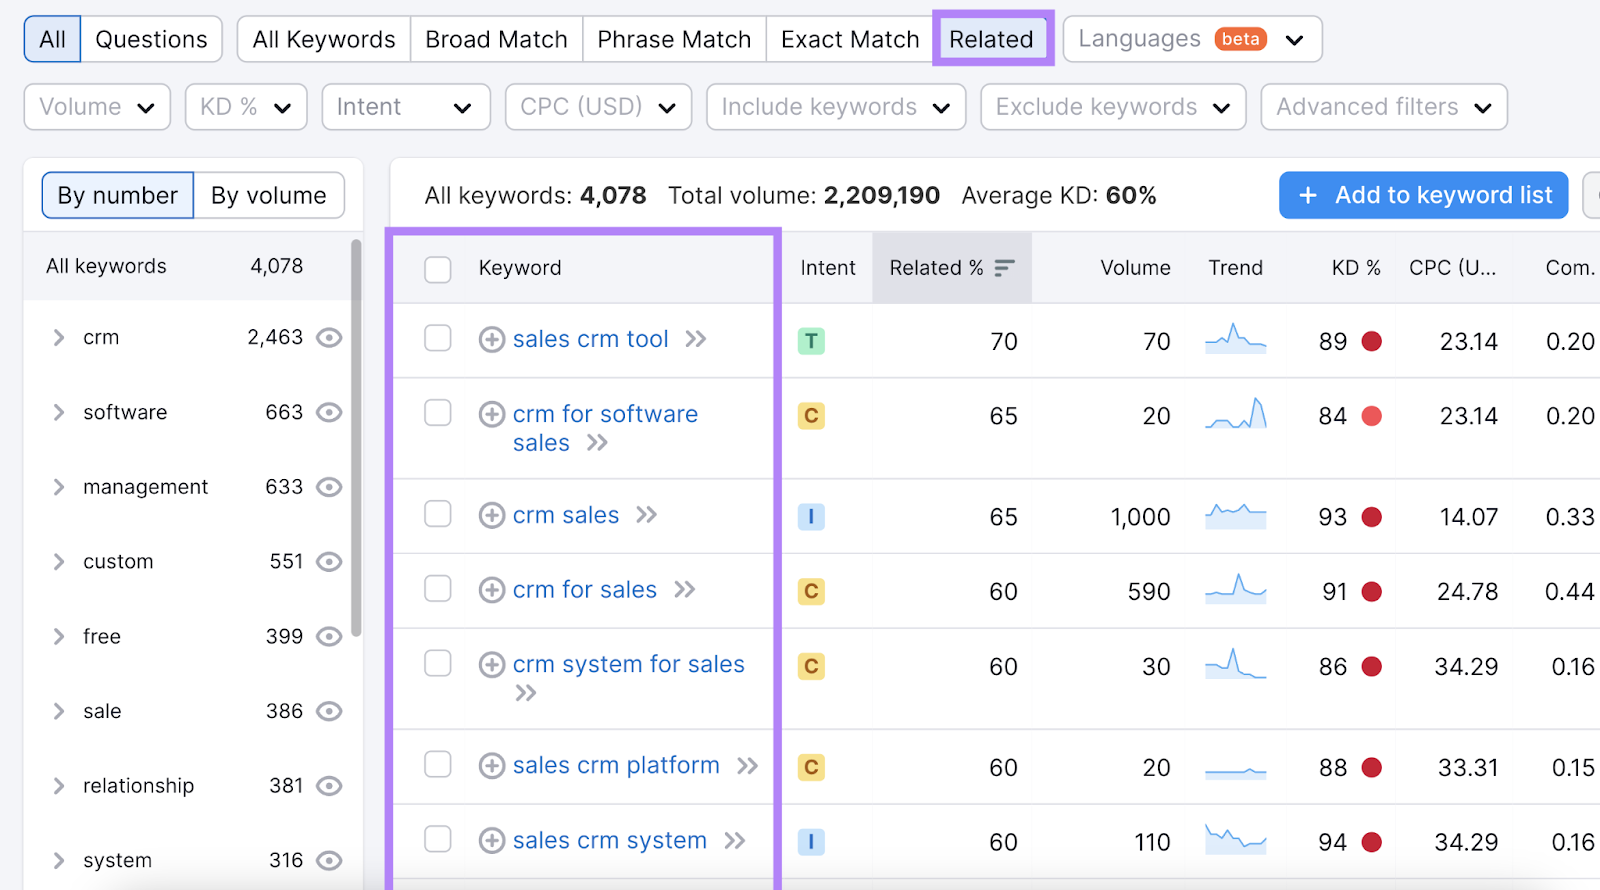 "Related" results for "sales crm" keyword